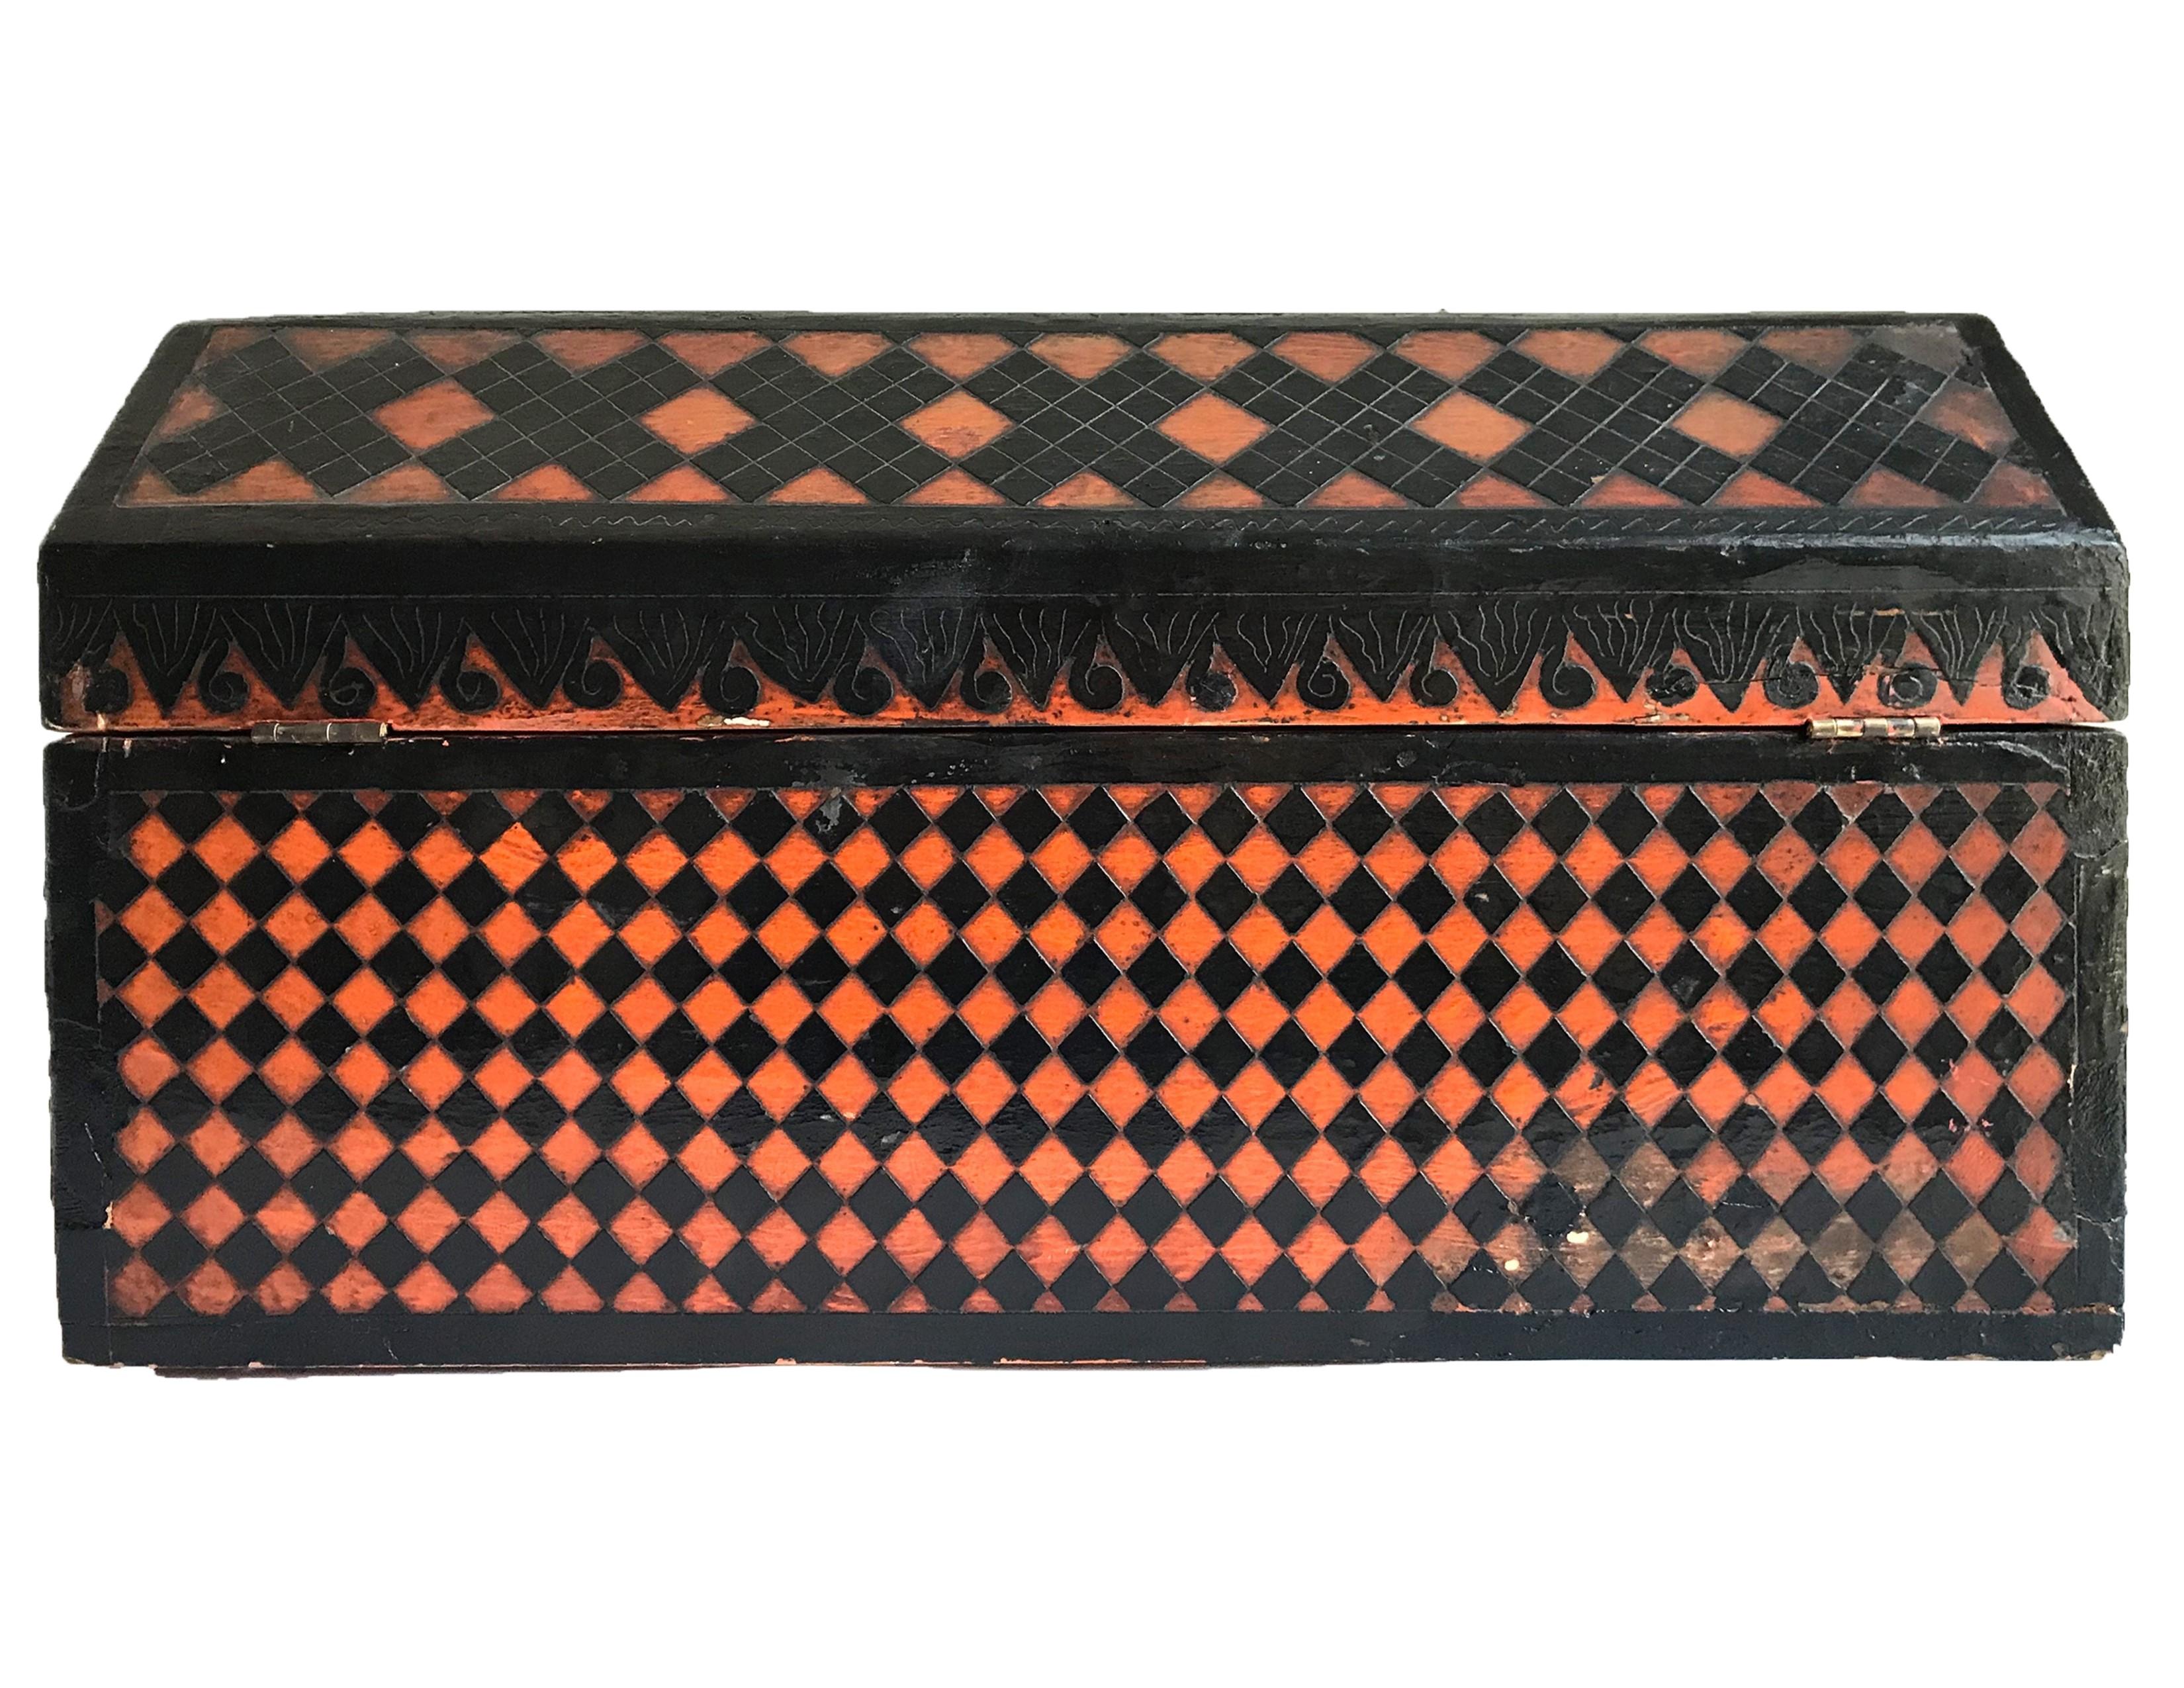 Early 19th century American carved lacquered Folk Art wooden box from Tennessee.